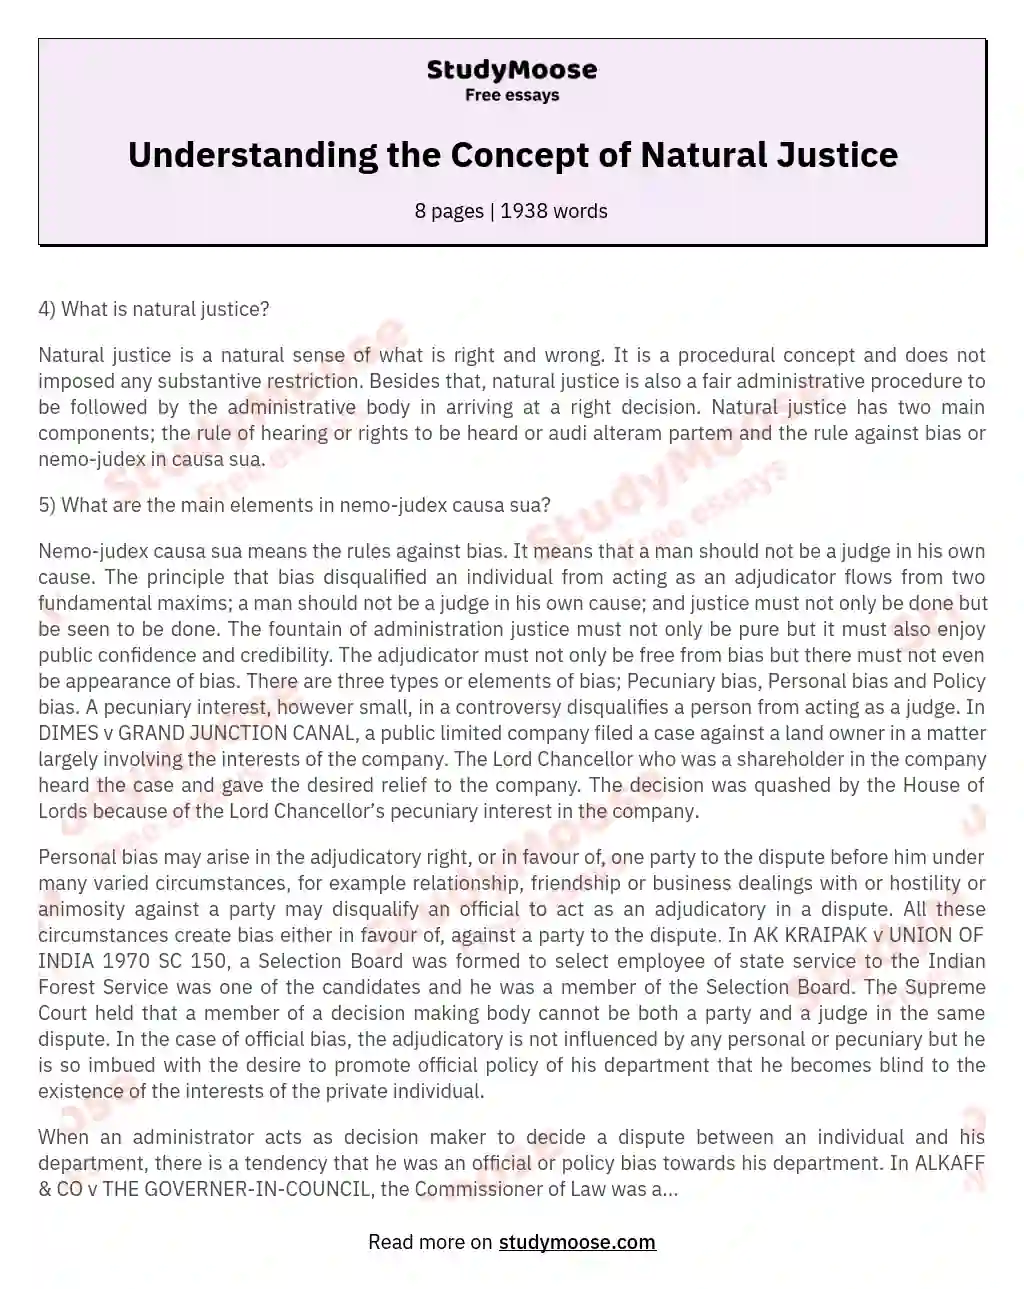 Understanding the Concept of Natural Justice essay